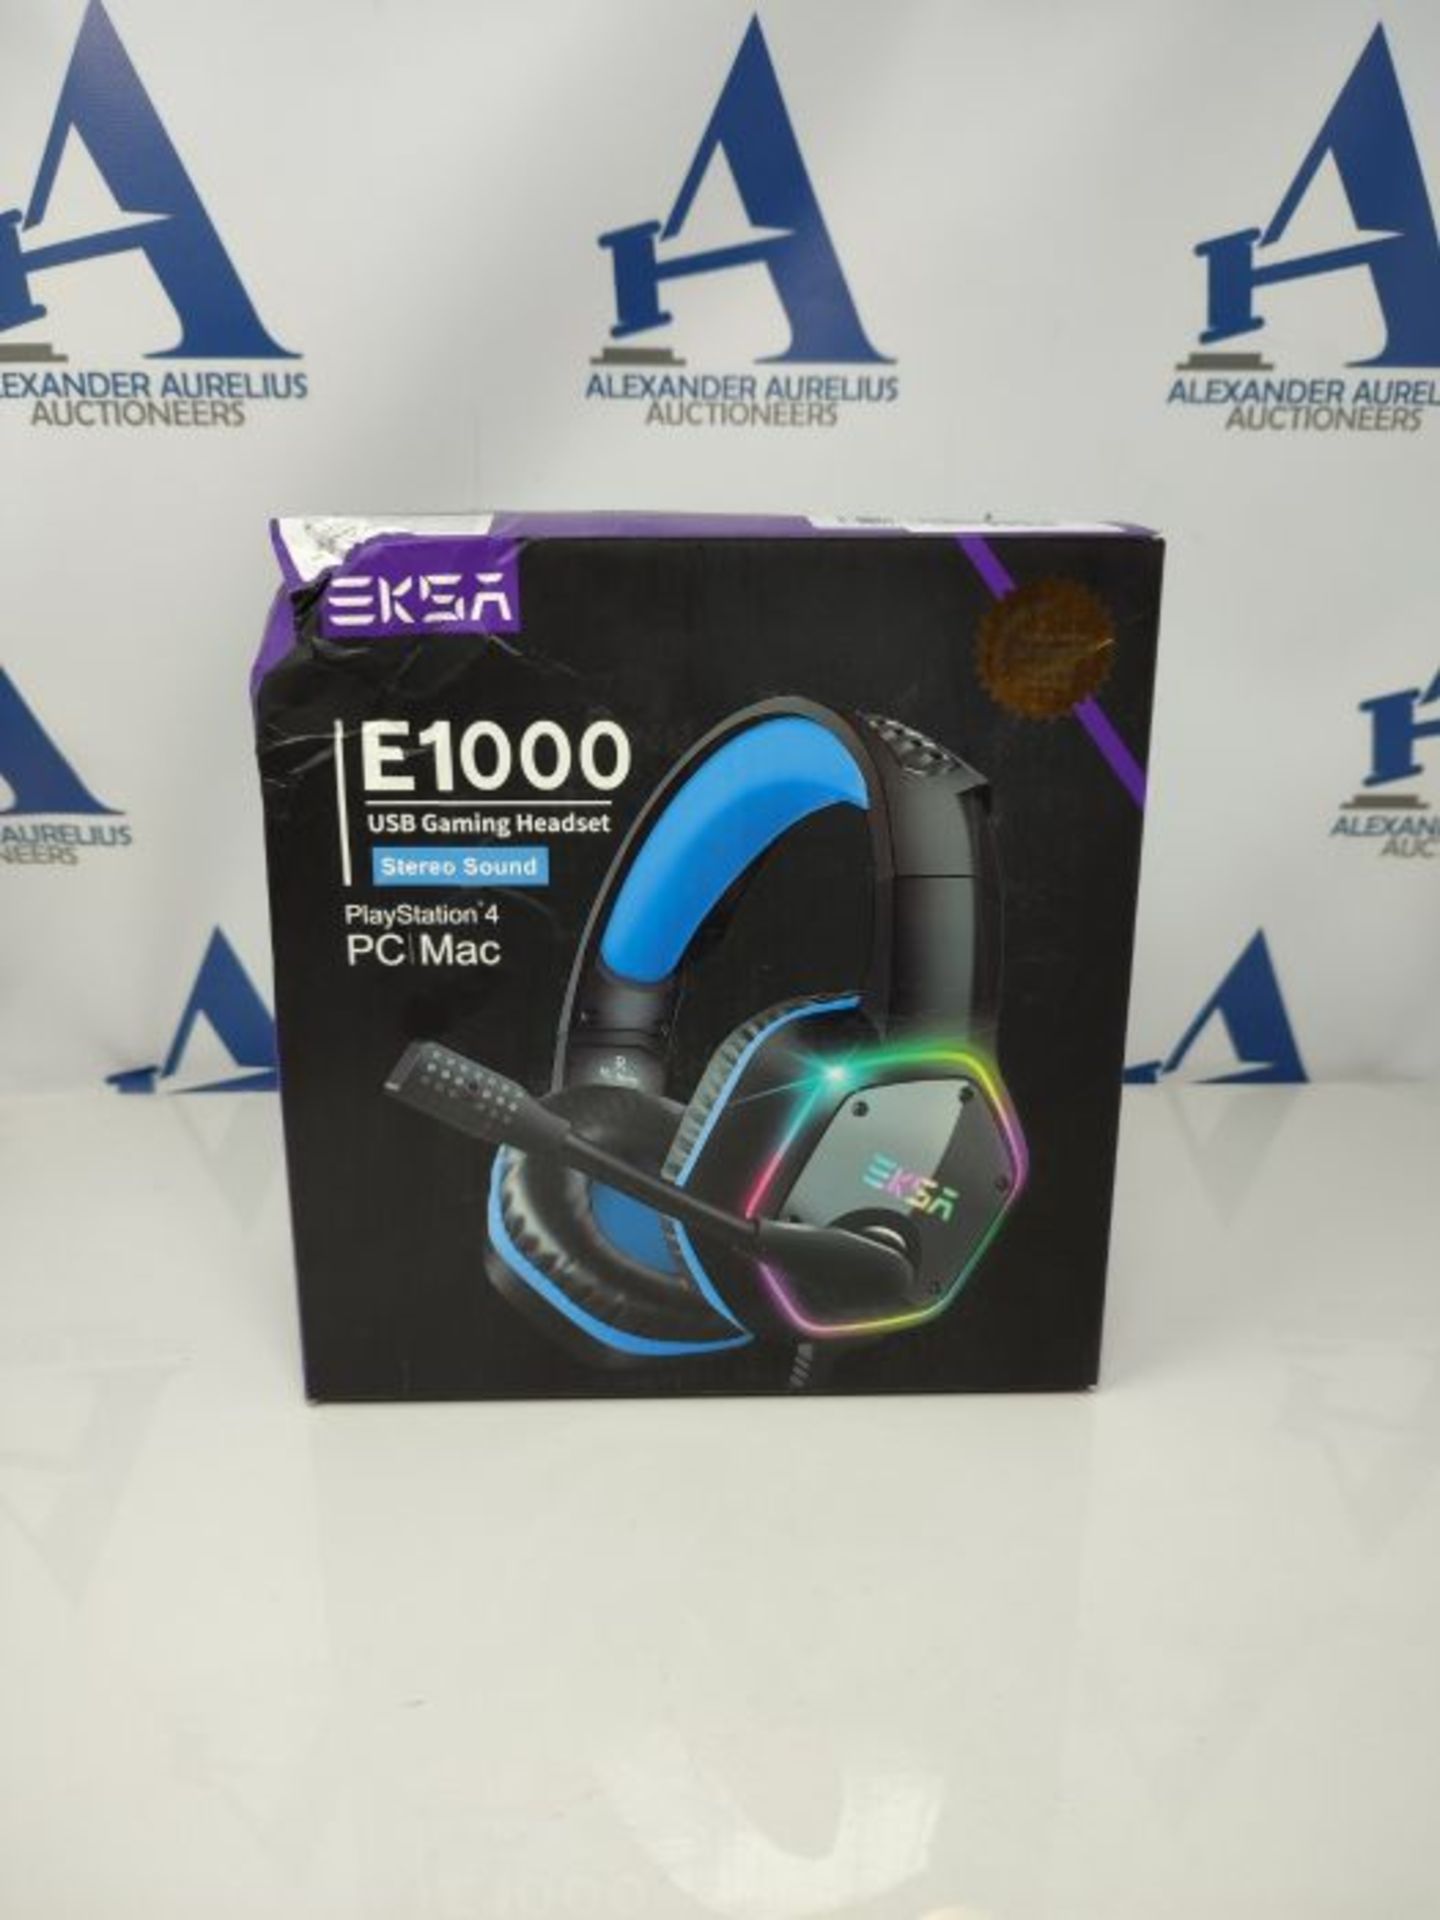 EKSA E1000 Gaming Headset for PS4 PC, Over-Ear Gaming Headphones with 7.1 Surround Sou - Image 2 of 3